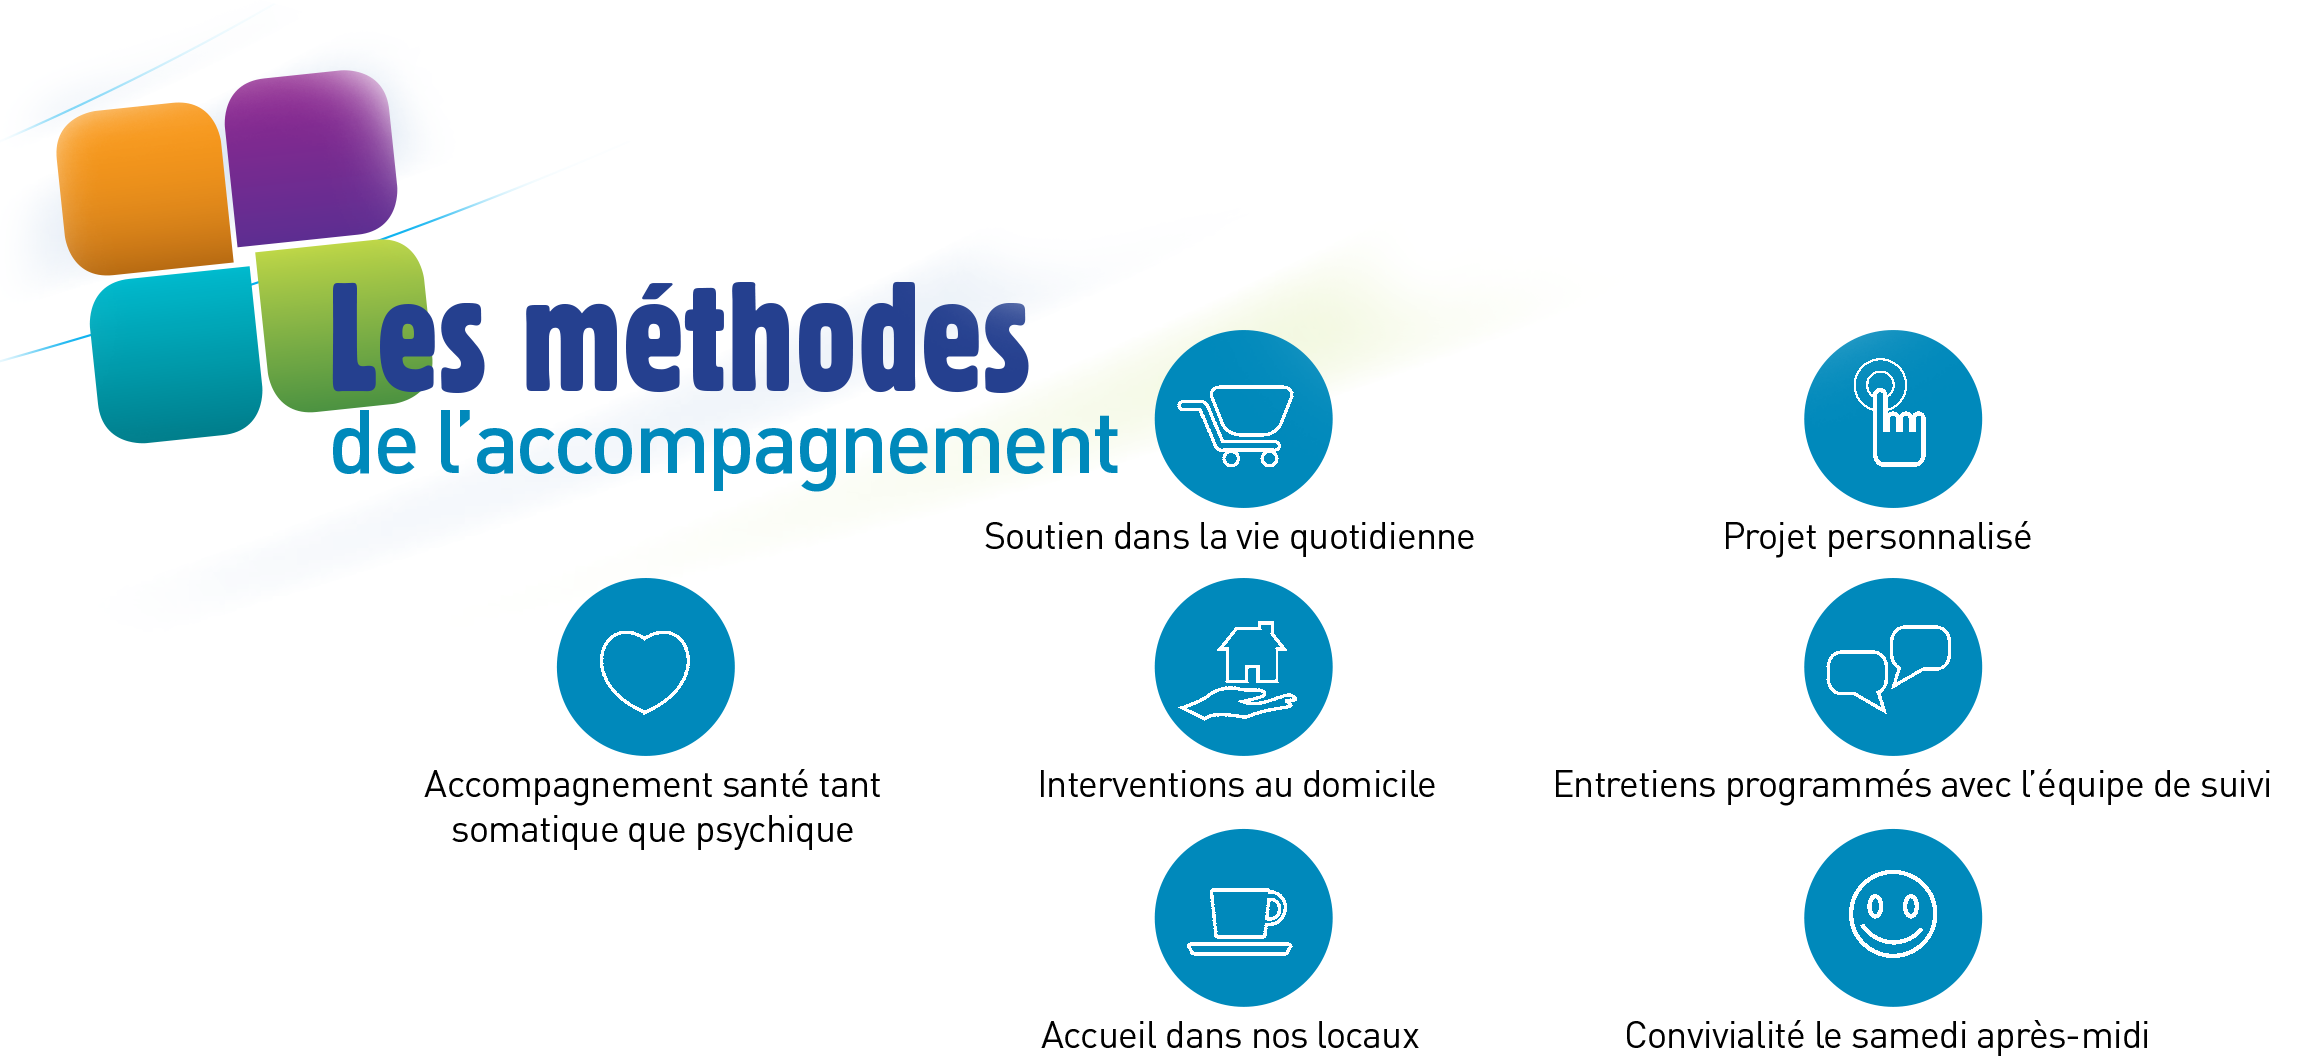 Methodes accompagnement route nouvelle